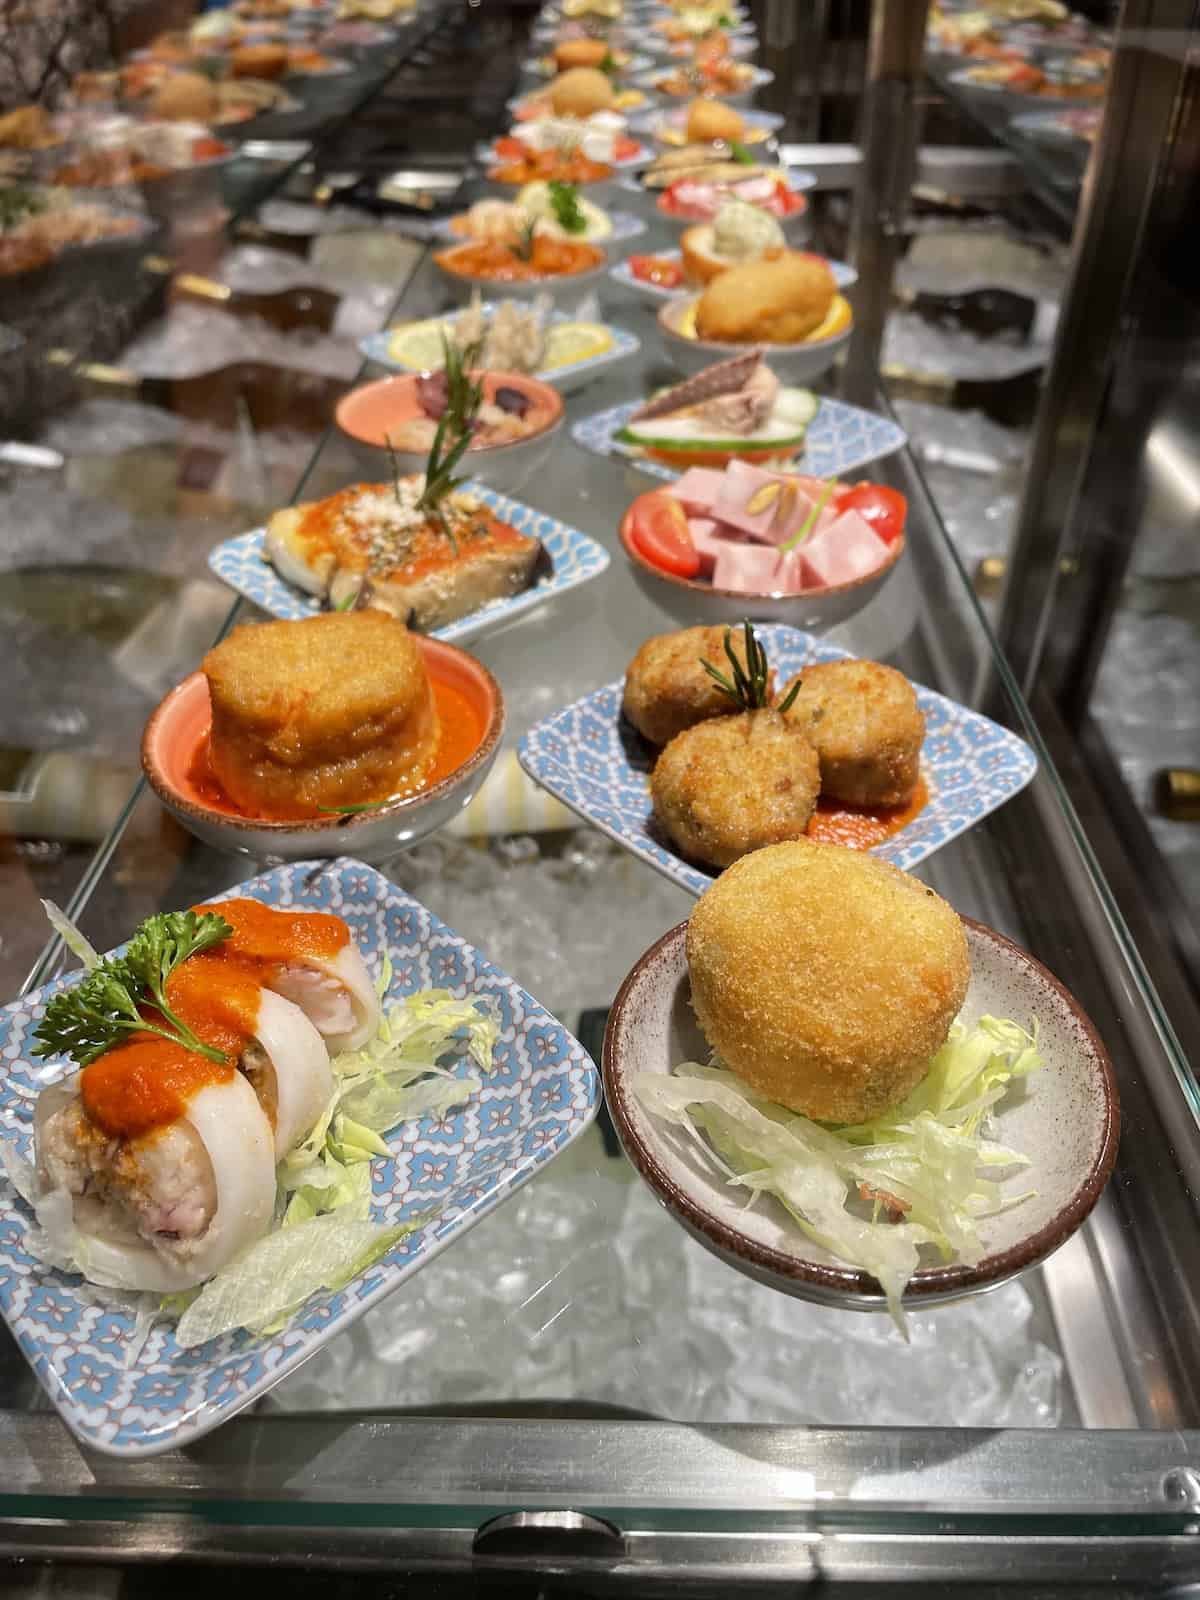 Small plate dishes on cruise ship.